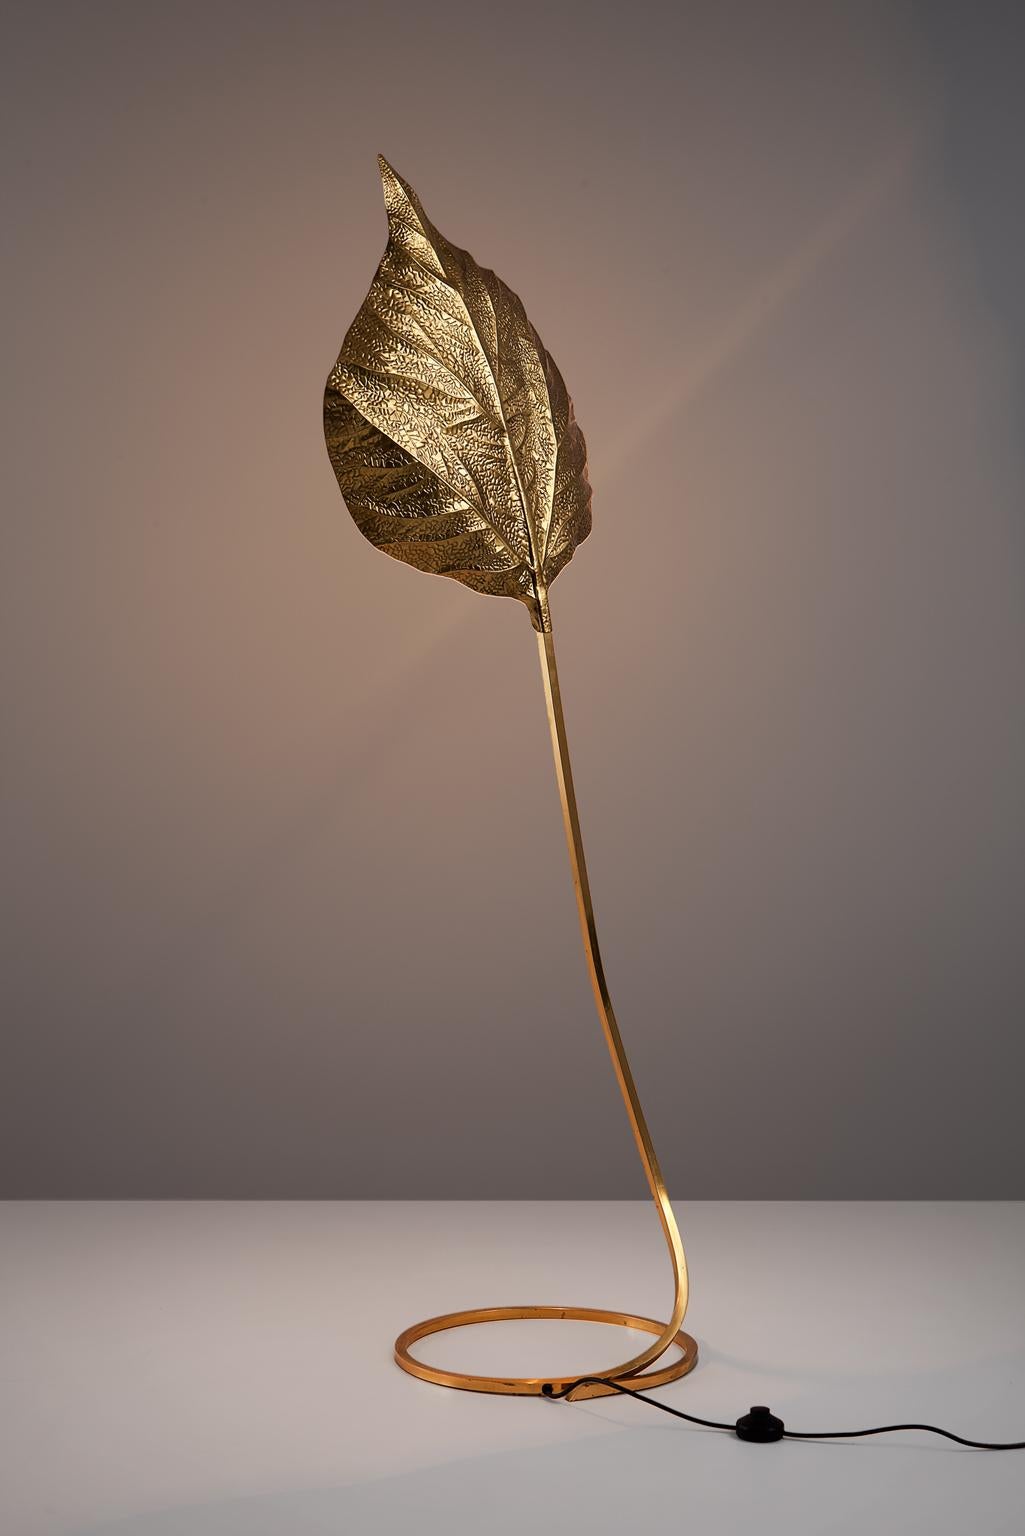 Carlo Giorgi, brass 'Rhubarb' leaf floor lamp, Italy, 1970s.

This large single leaf floor lamp is designed by Carlo Giorgi and produced in Italy in the 1970s. This biomorphic, hand-hammered brass floor lamp resembles a large rhubarb leave. The